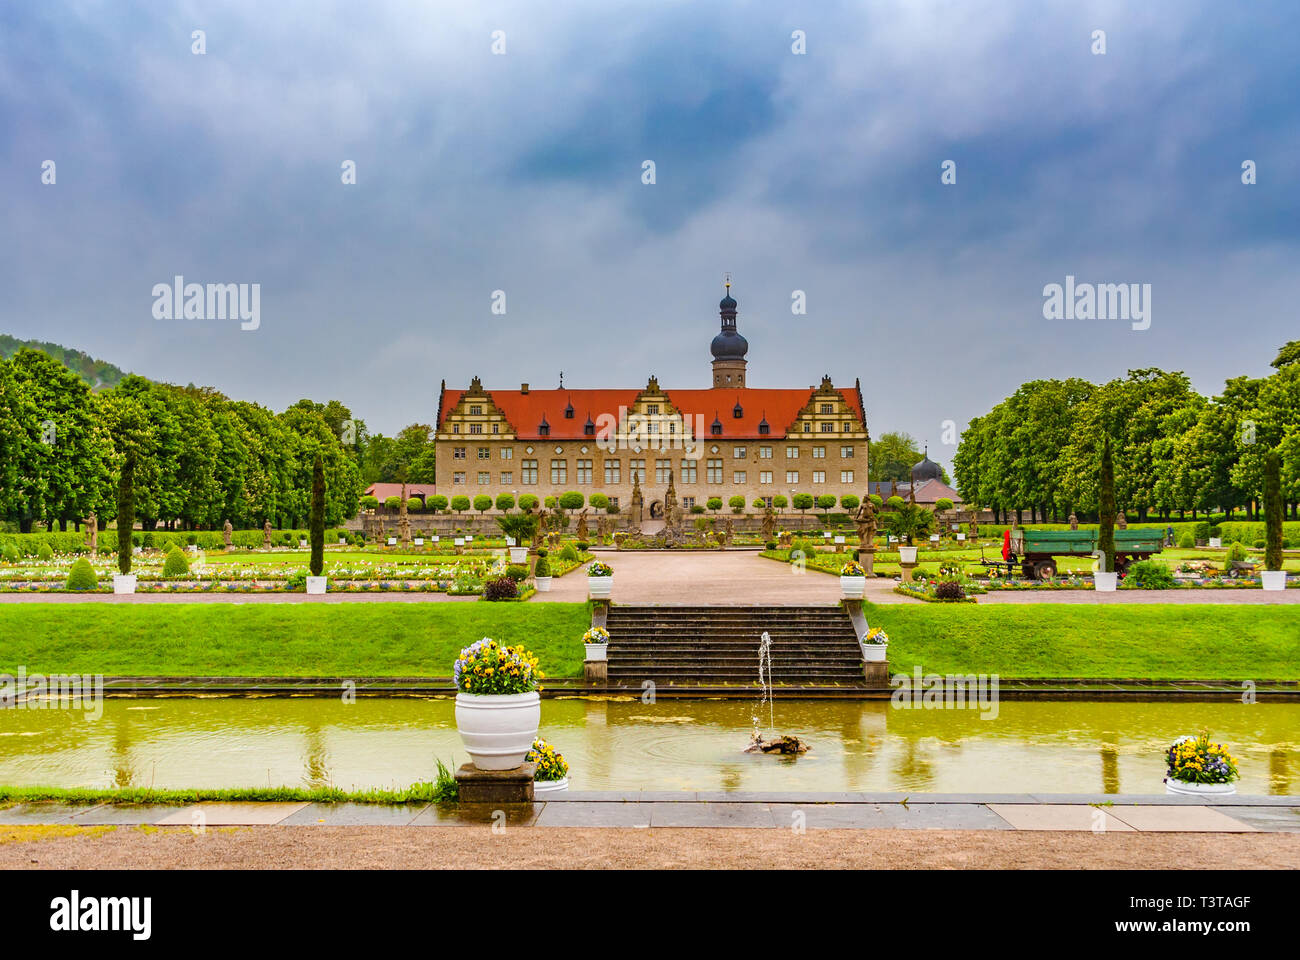 Nice panoramic view of the famous Weikersheim Palace from the pond of the Baroque garden on a cloudy day in Germany. The landmark was the traditional... Stock Photo